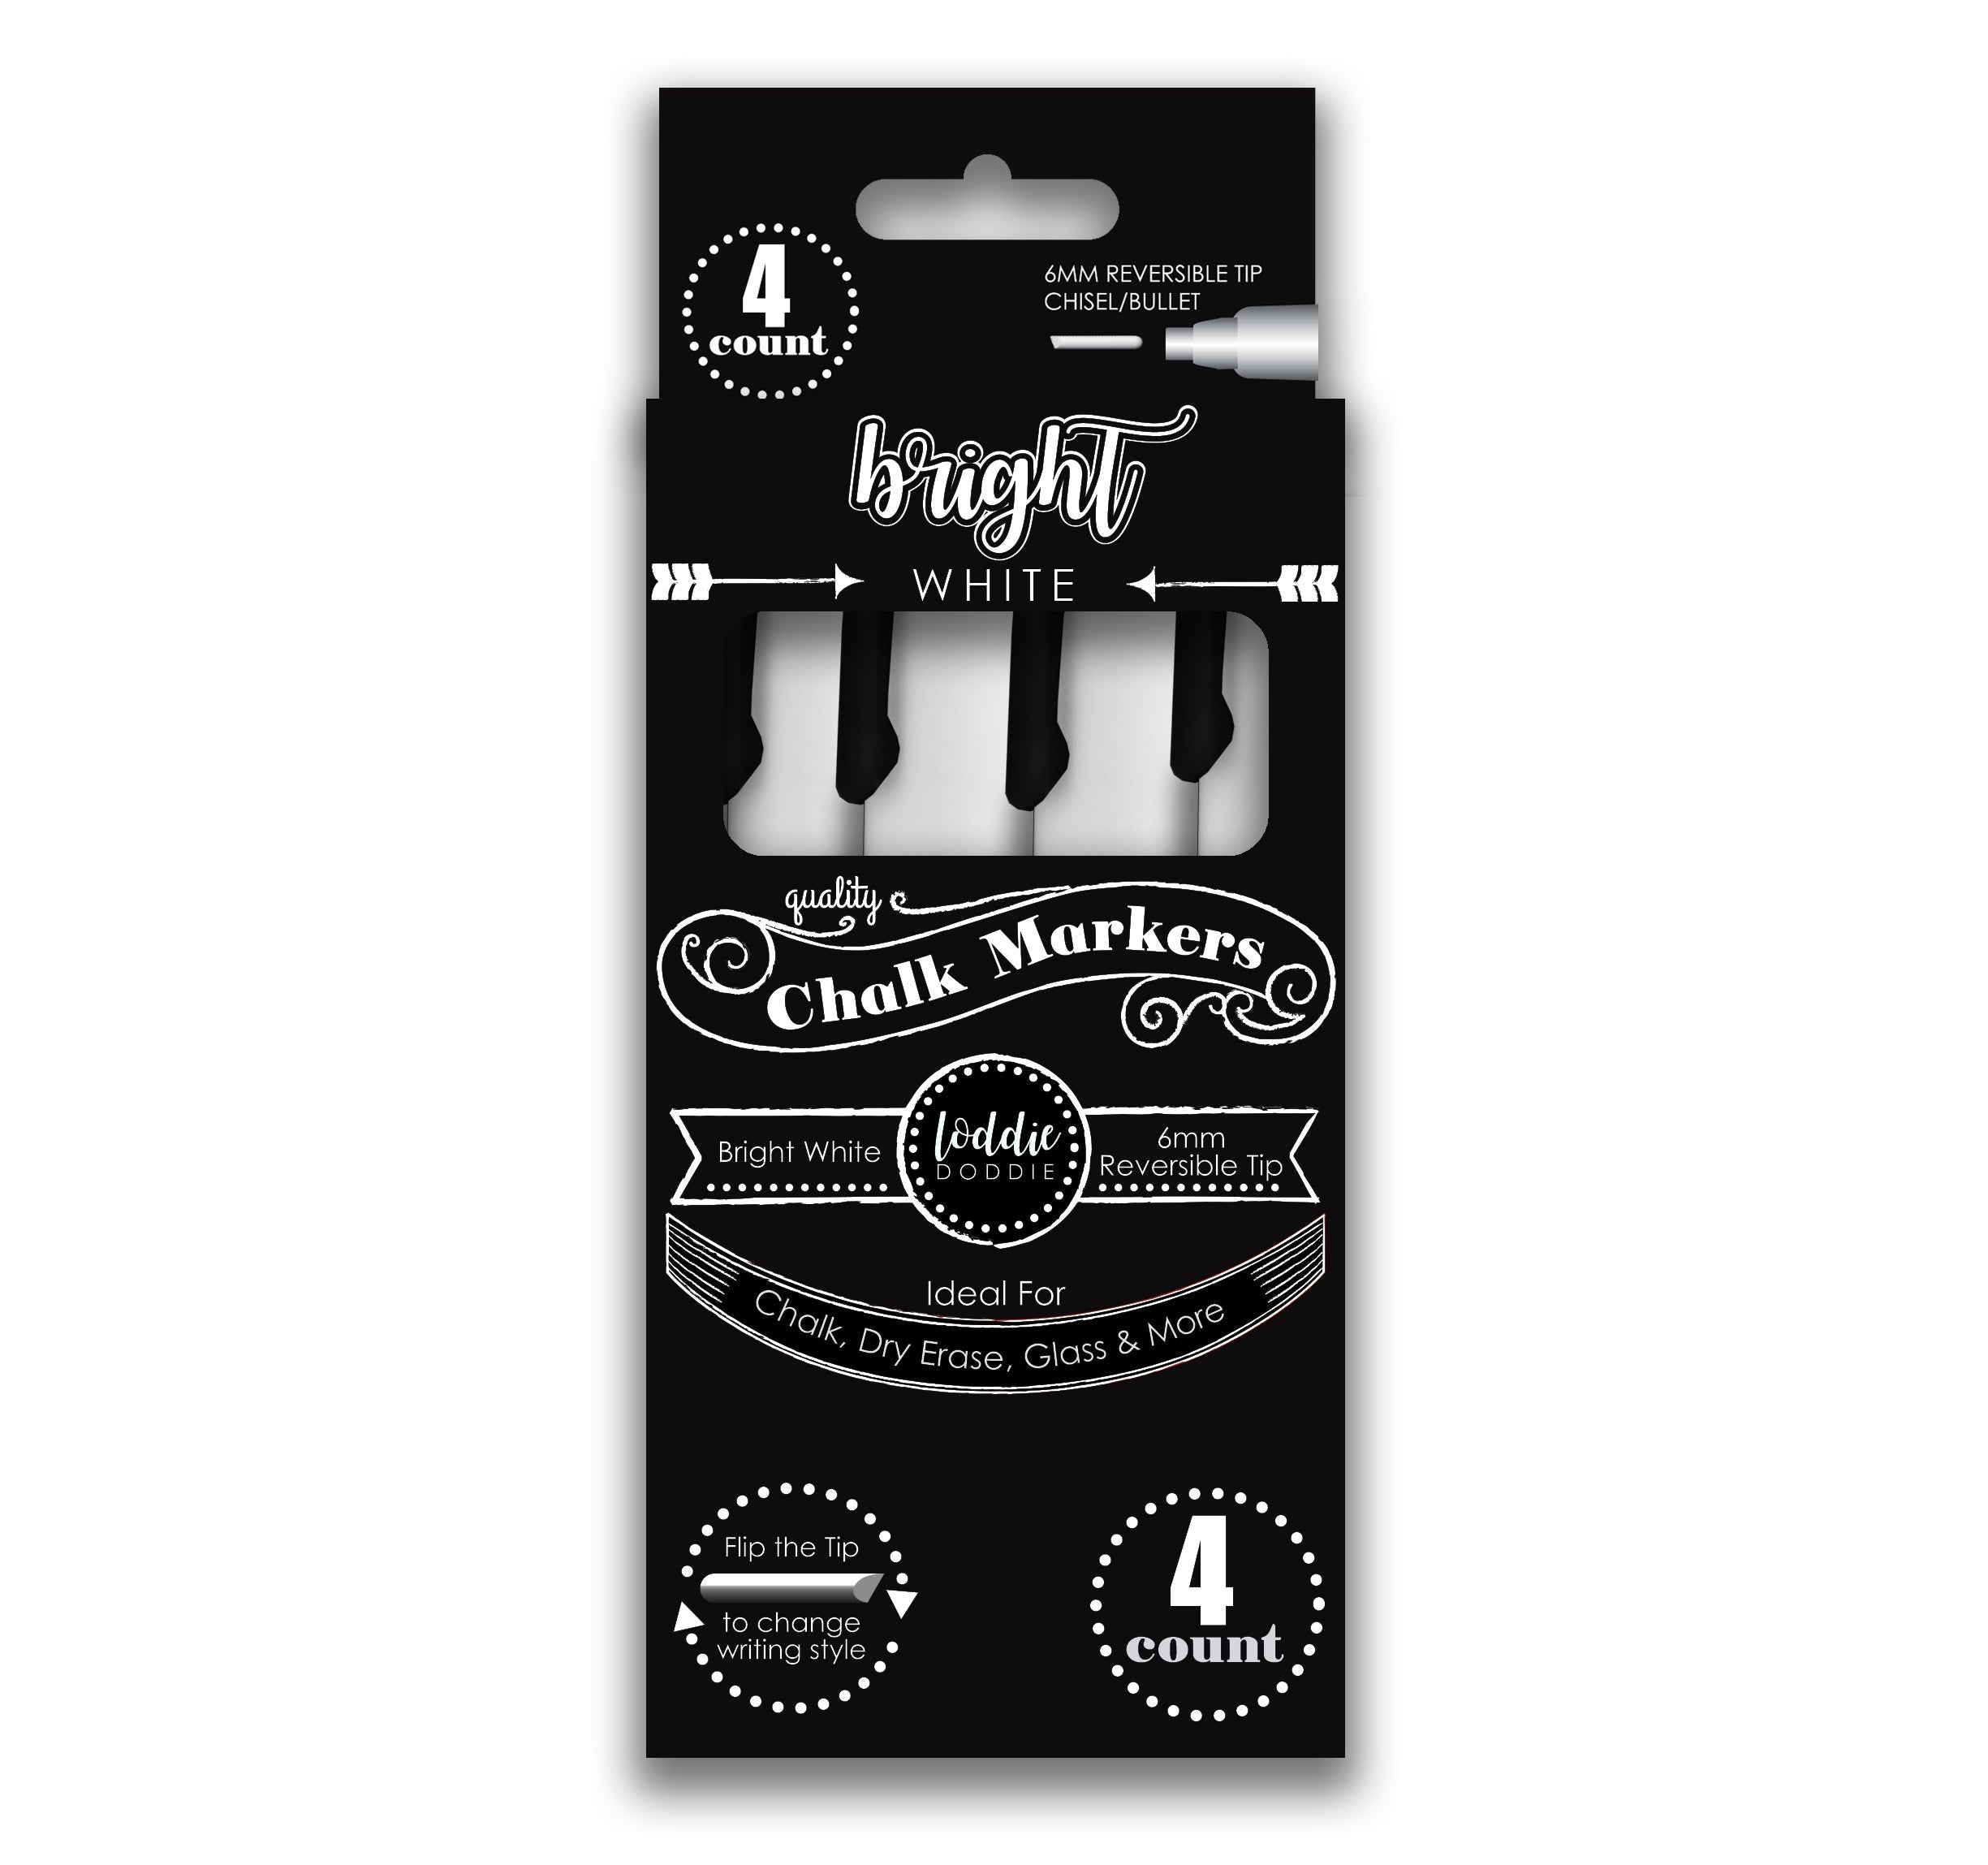 Loddie Doddie Chalk Markers - 8ct Metallic Colors - Perfect for Chalkboard  Signs, Blackboards, Windows, Glass, Bistro | 6mm Reversible Bullet & Chisel